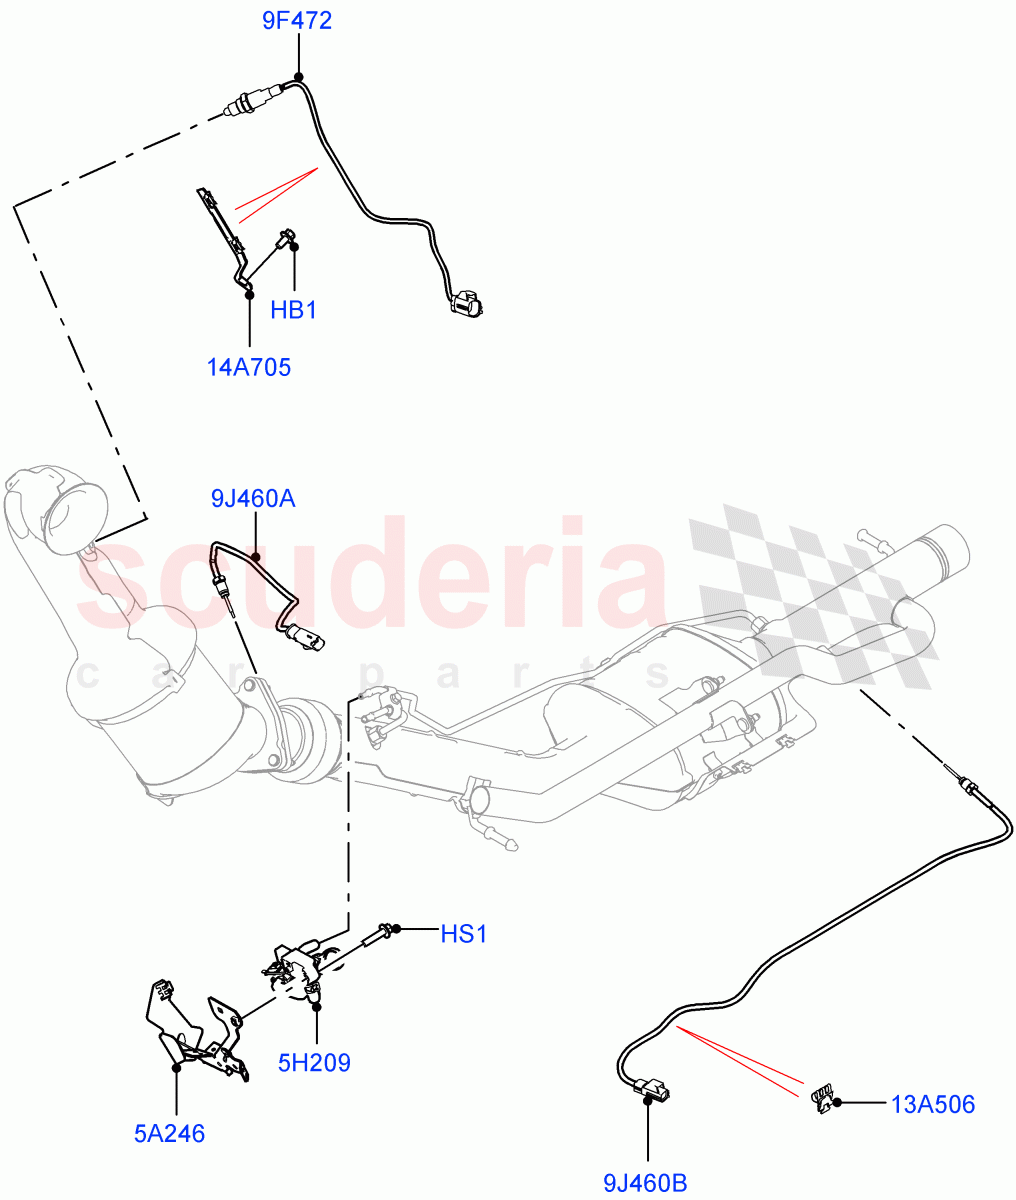 Exhaust Sensors And Modules(2.0L AJ20D4 Diesel Mid PTA,Proconve L6 Emissions,Itatiaia (Brazil))((V)FROMLT000001) of Land Rover Land Rover Discovery Sport (2015+) [2.0 Turbo Diesel]